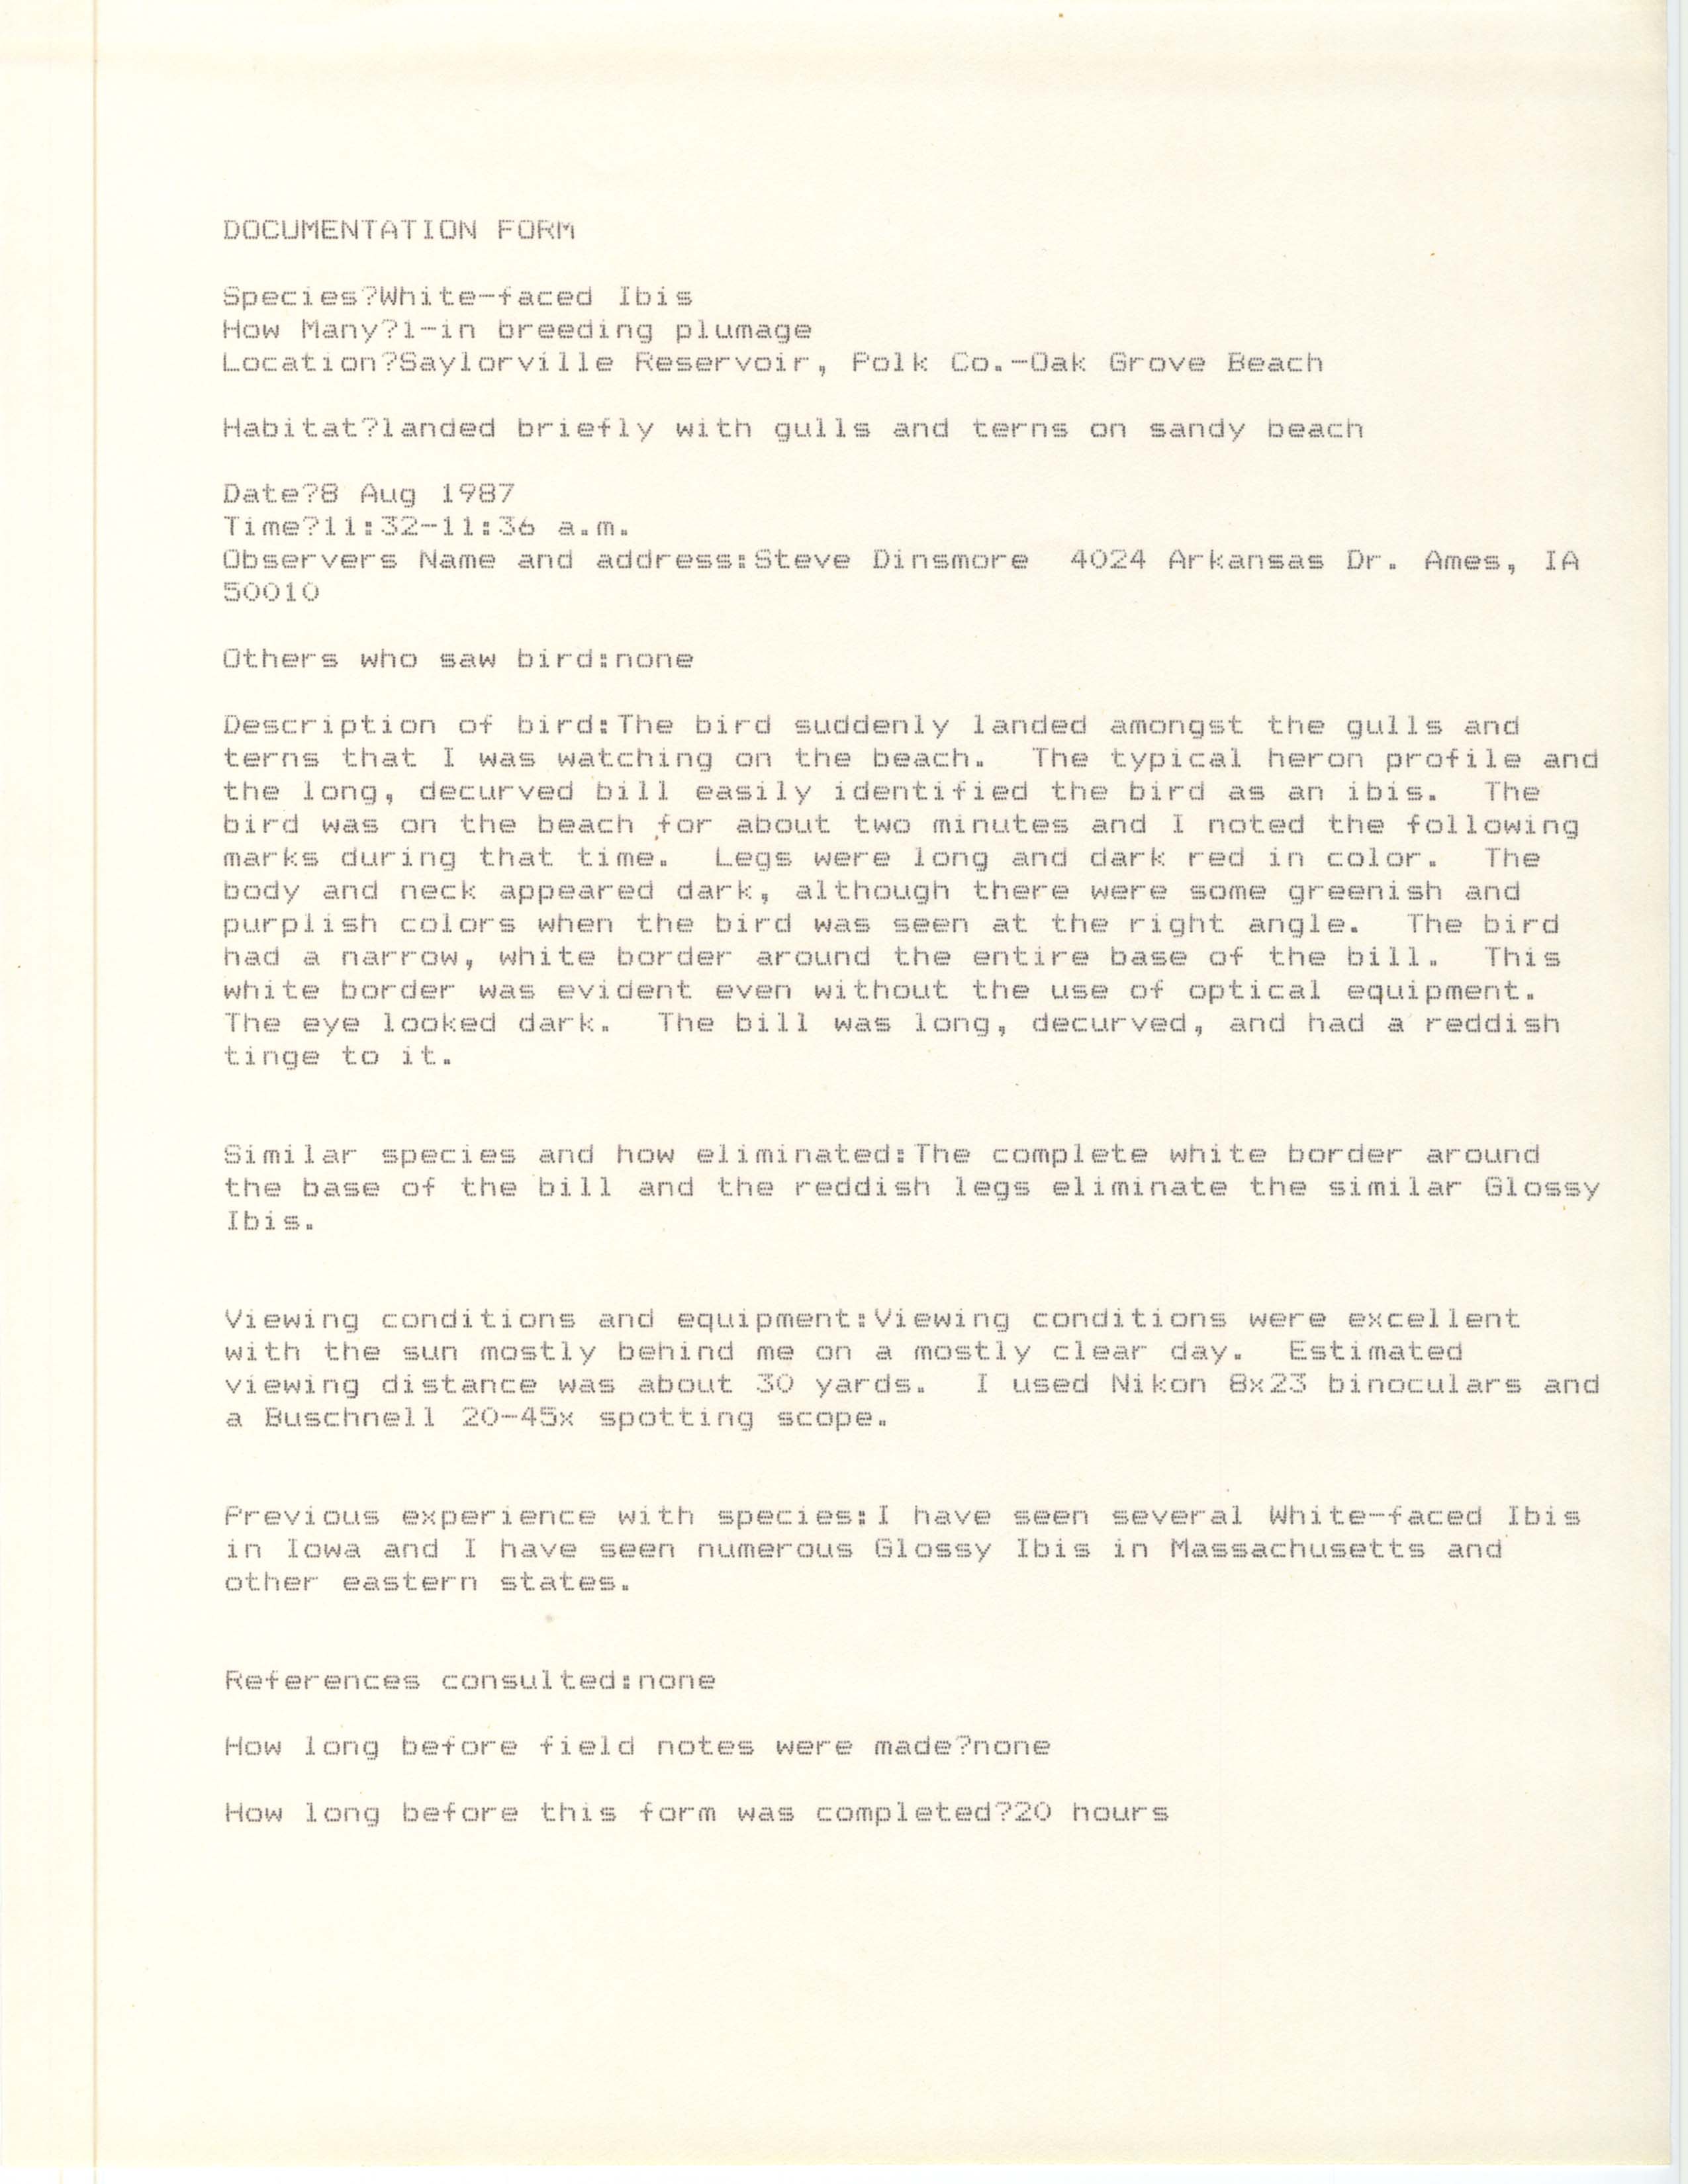 Rare bird documentation form for White-faced Ibis at Saylorville Reservoir, 1987